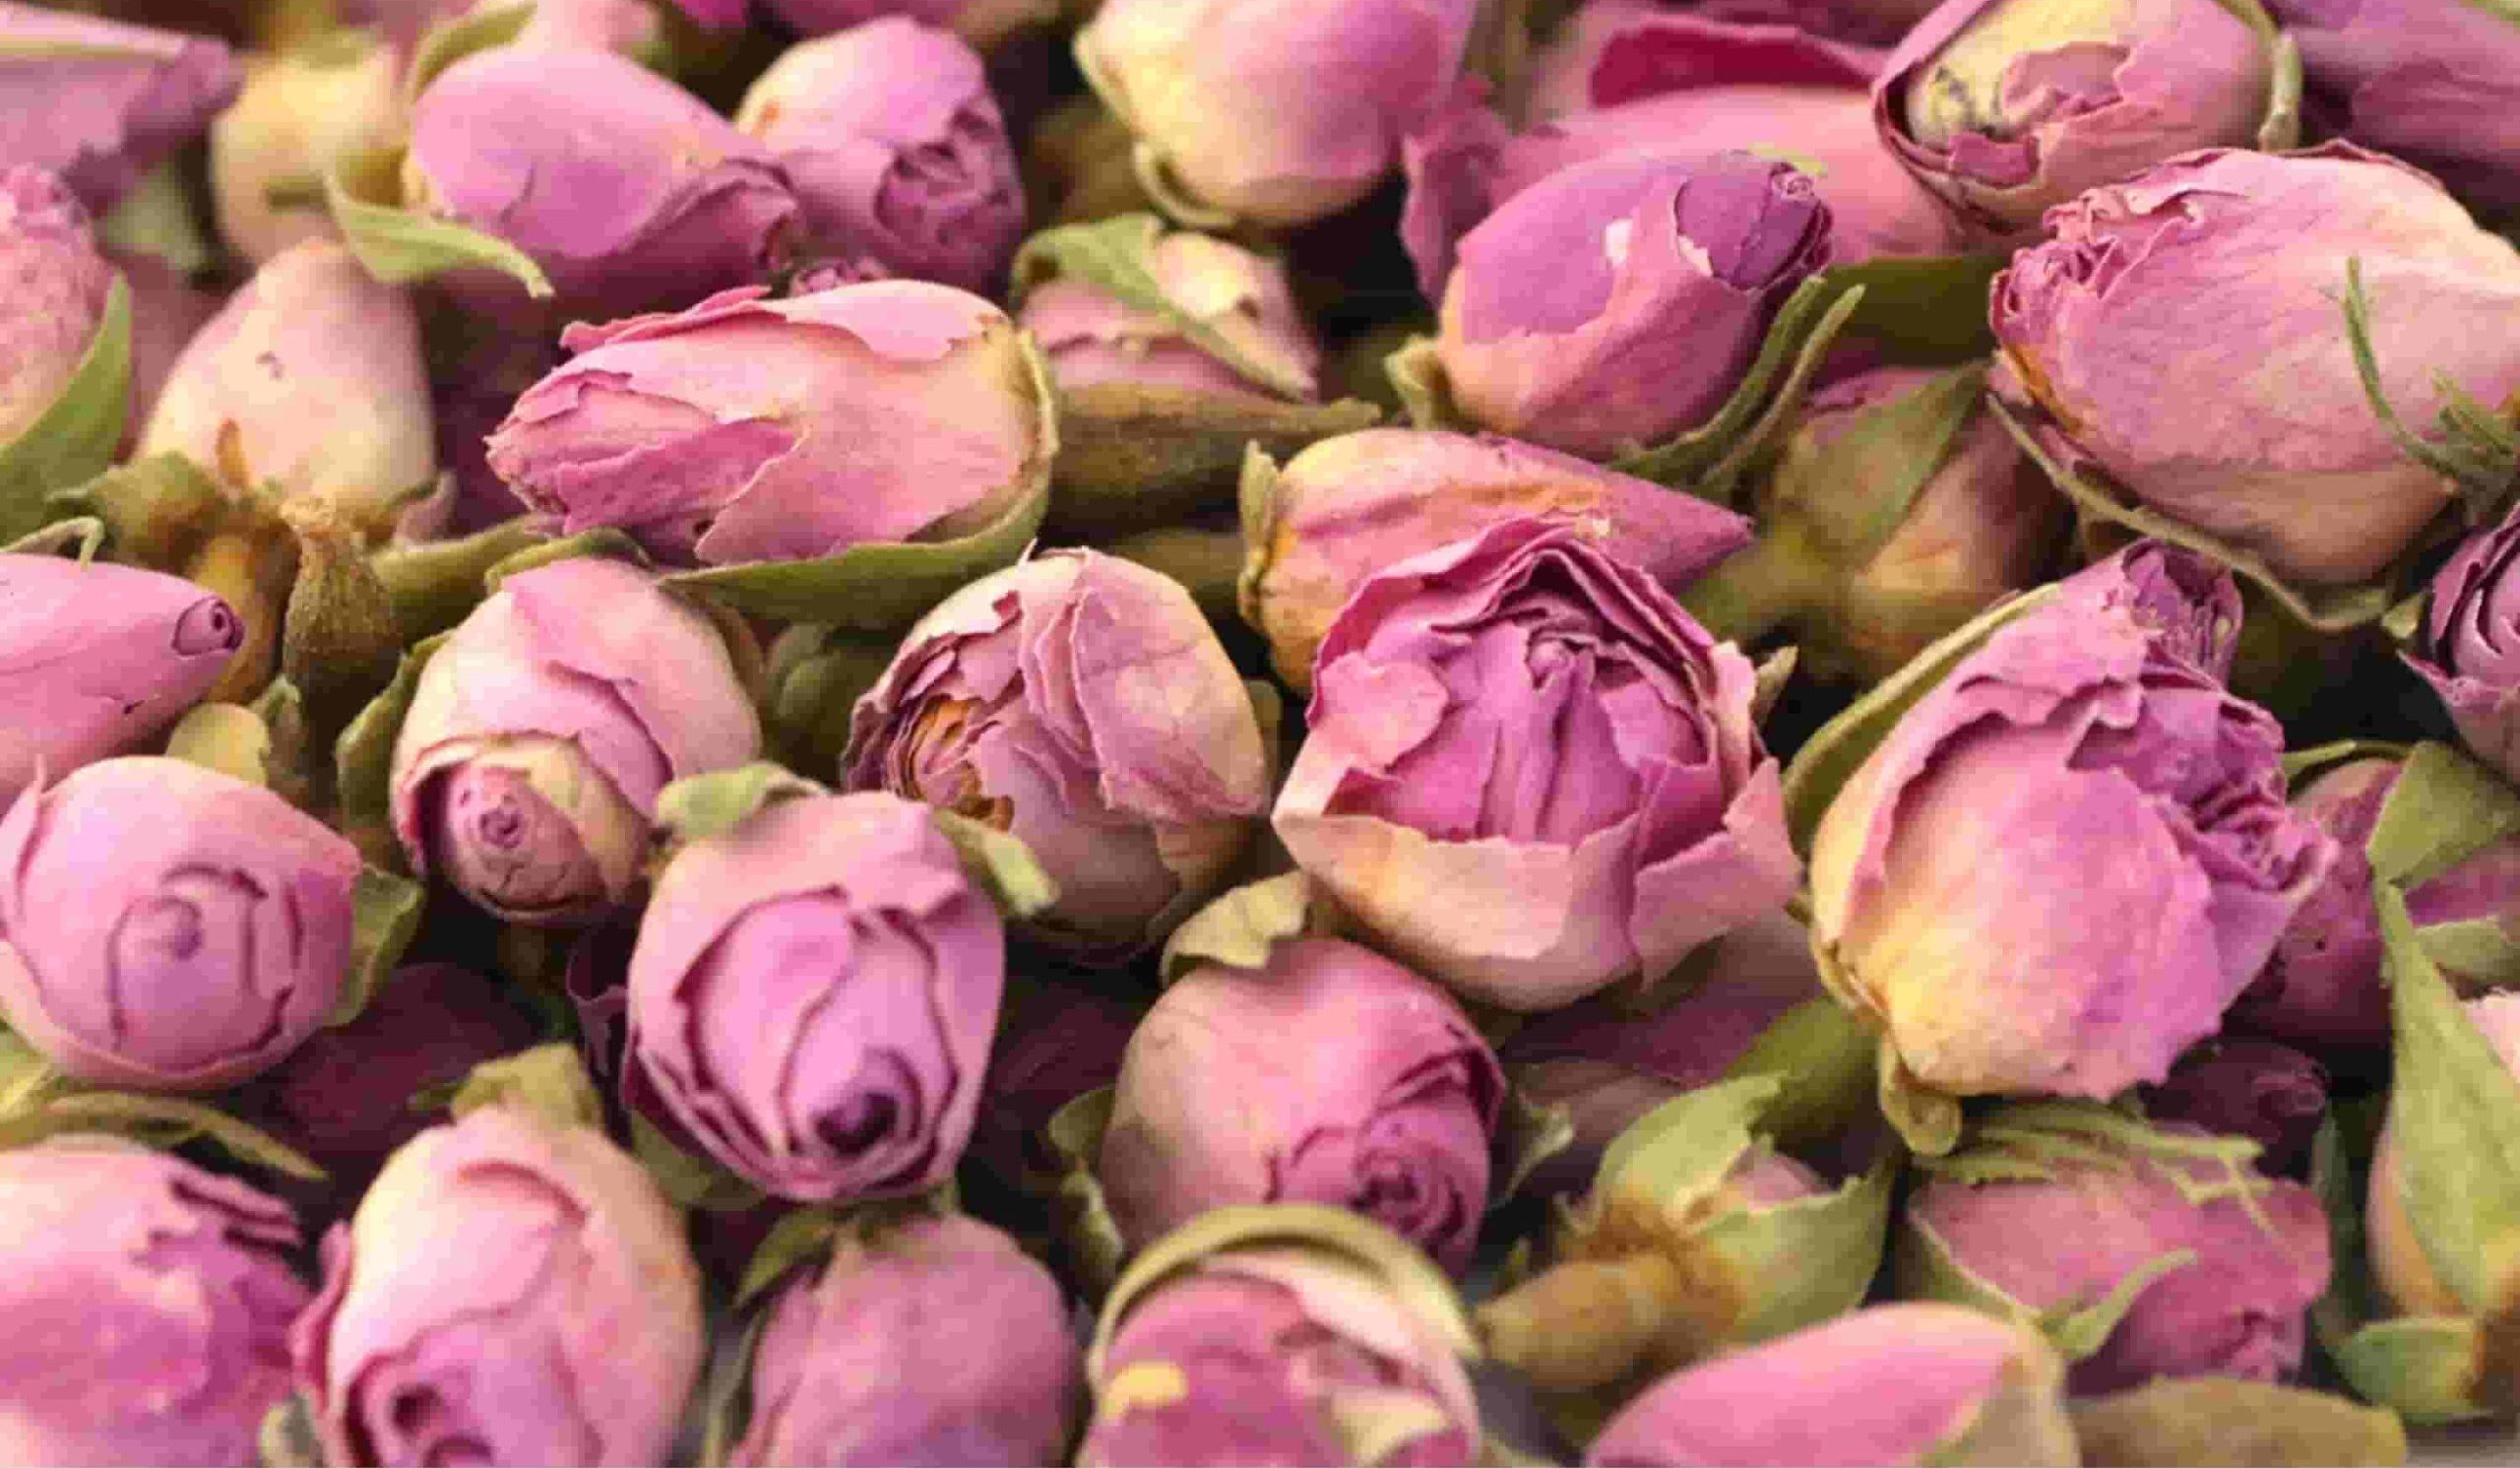 The price of dried rosebuds+ cheap purchase